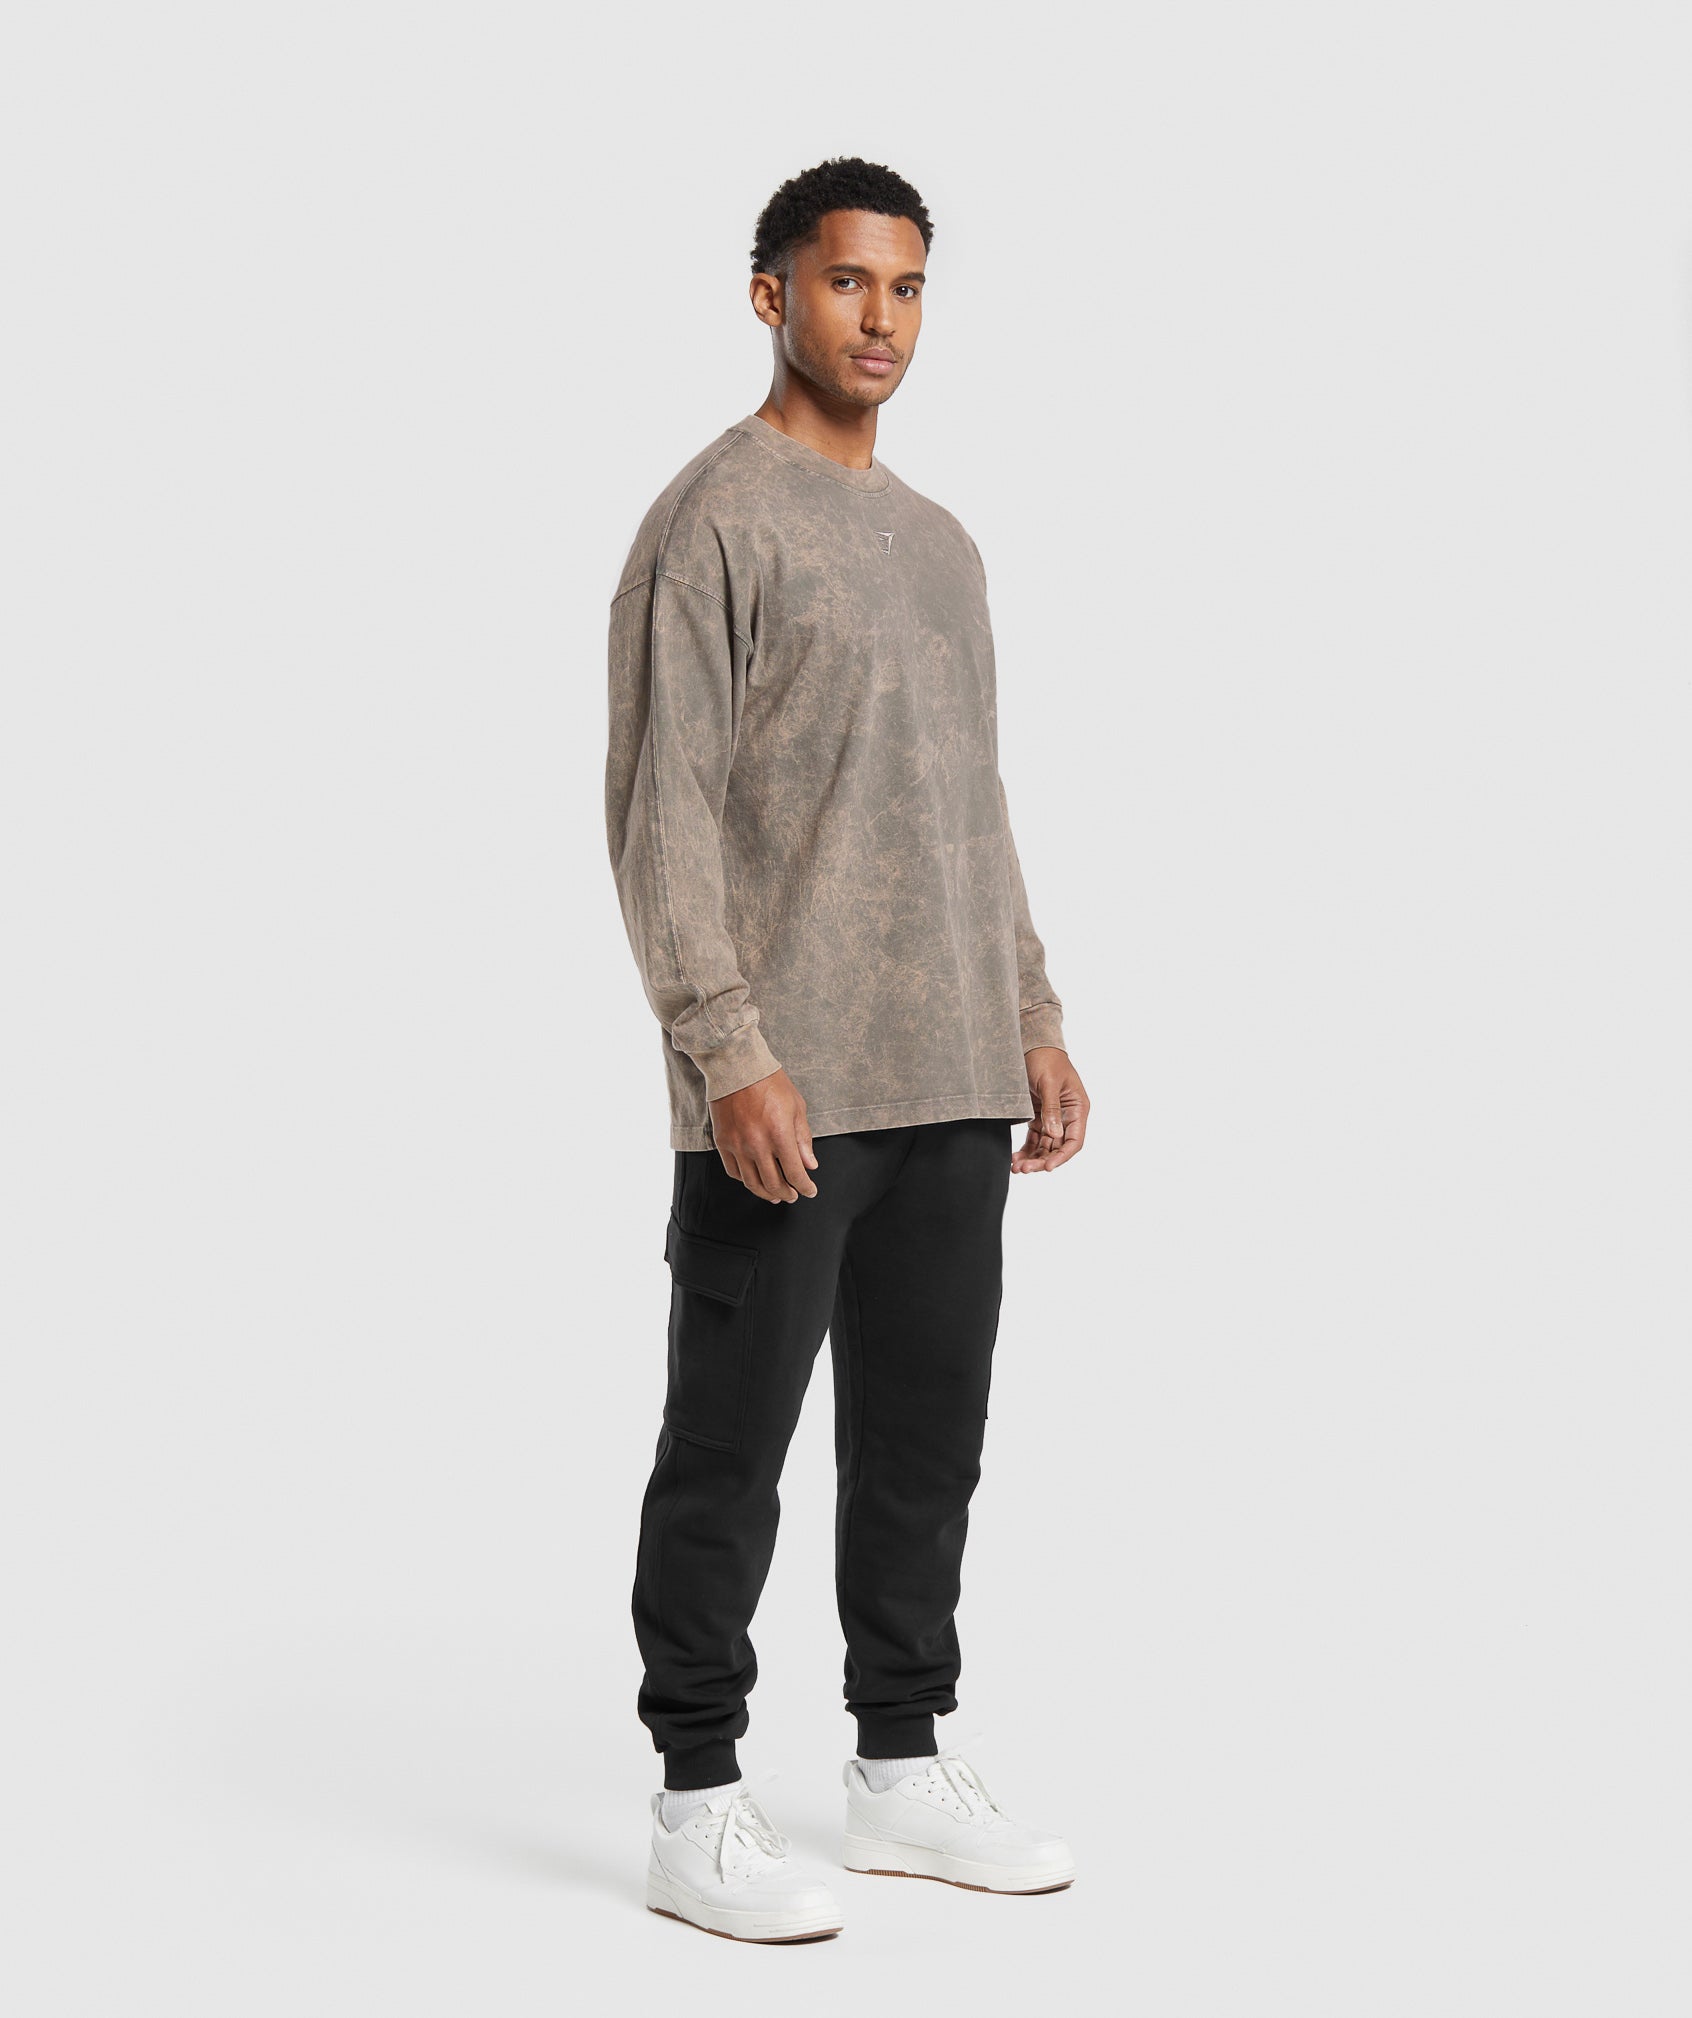 Rest Day Washed Long Sleeve T-Shirt in Linen Brown - view 4